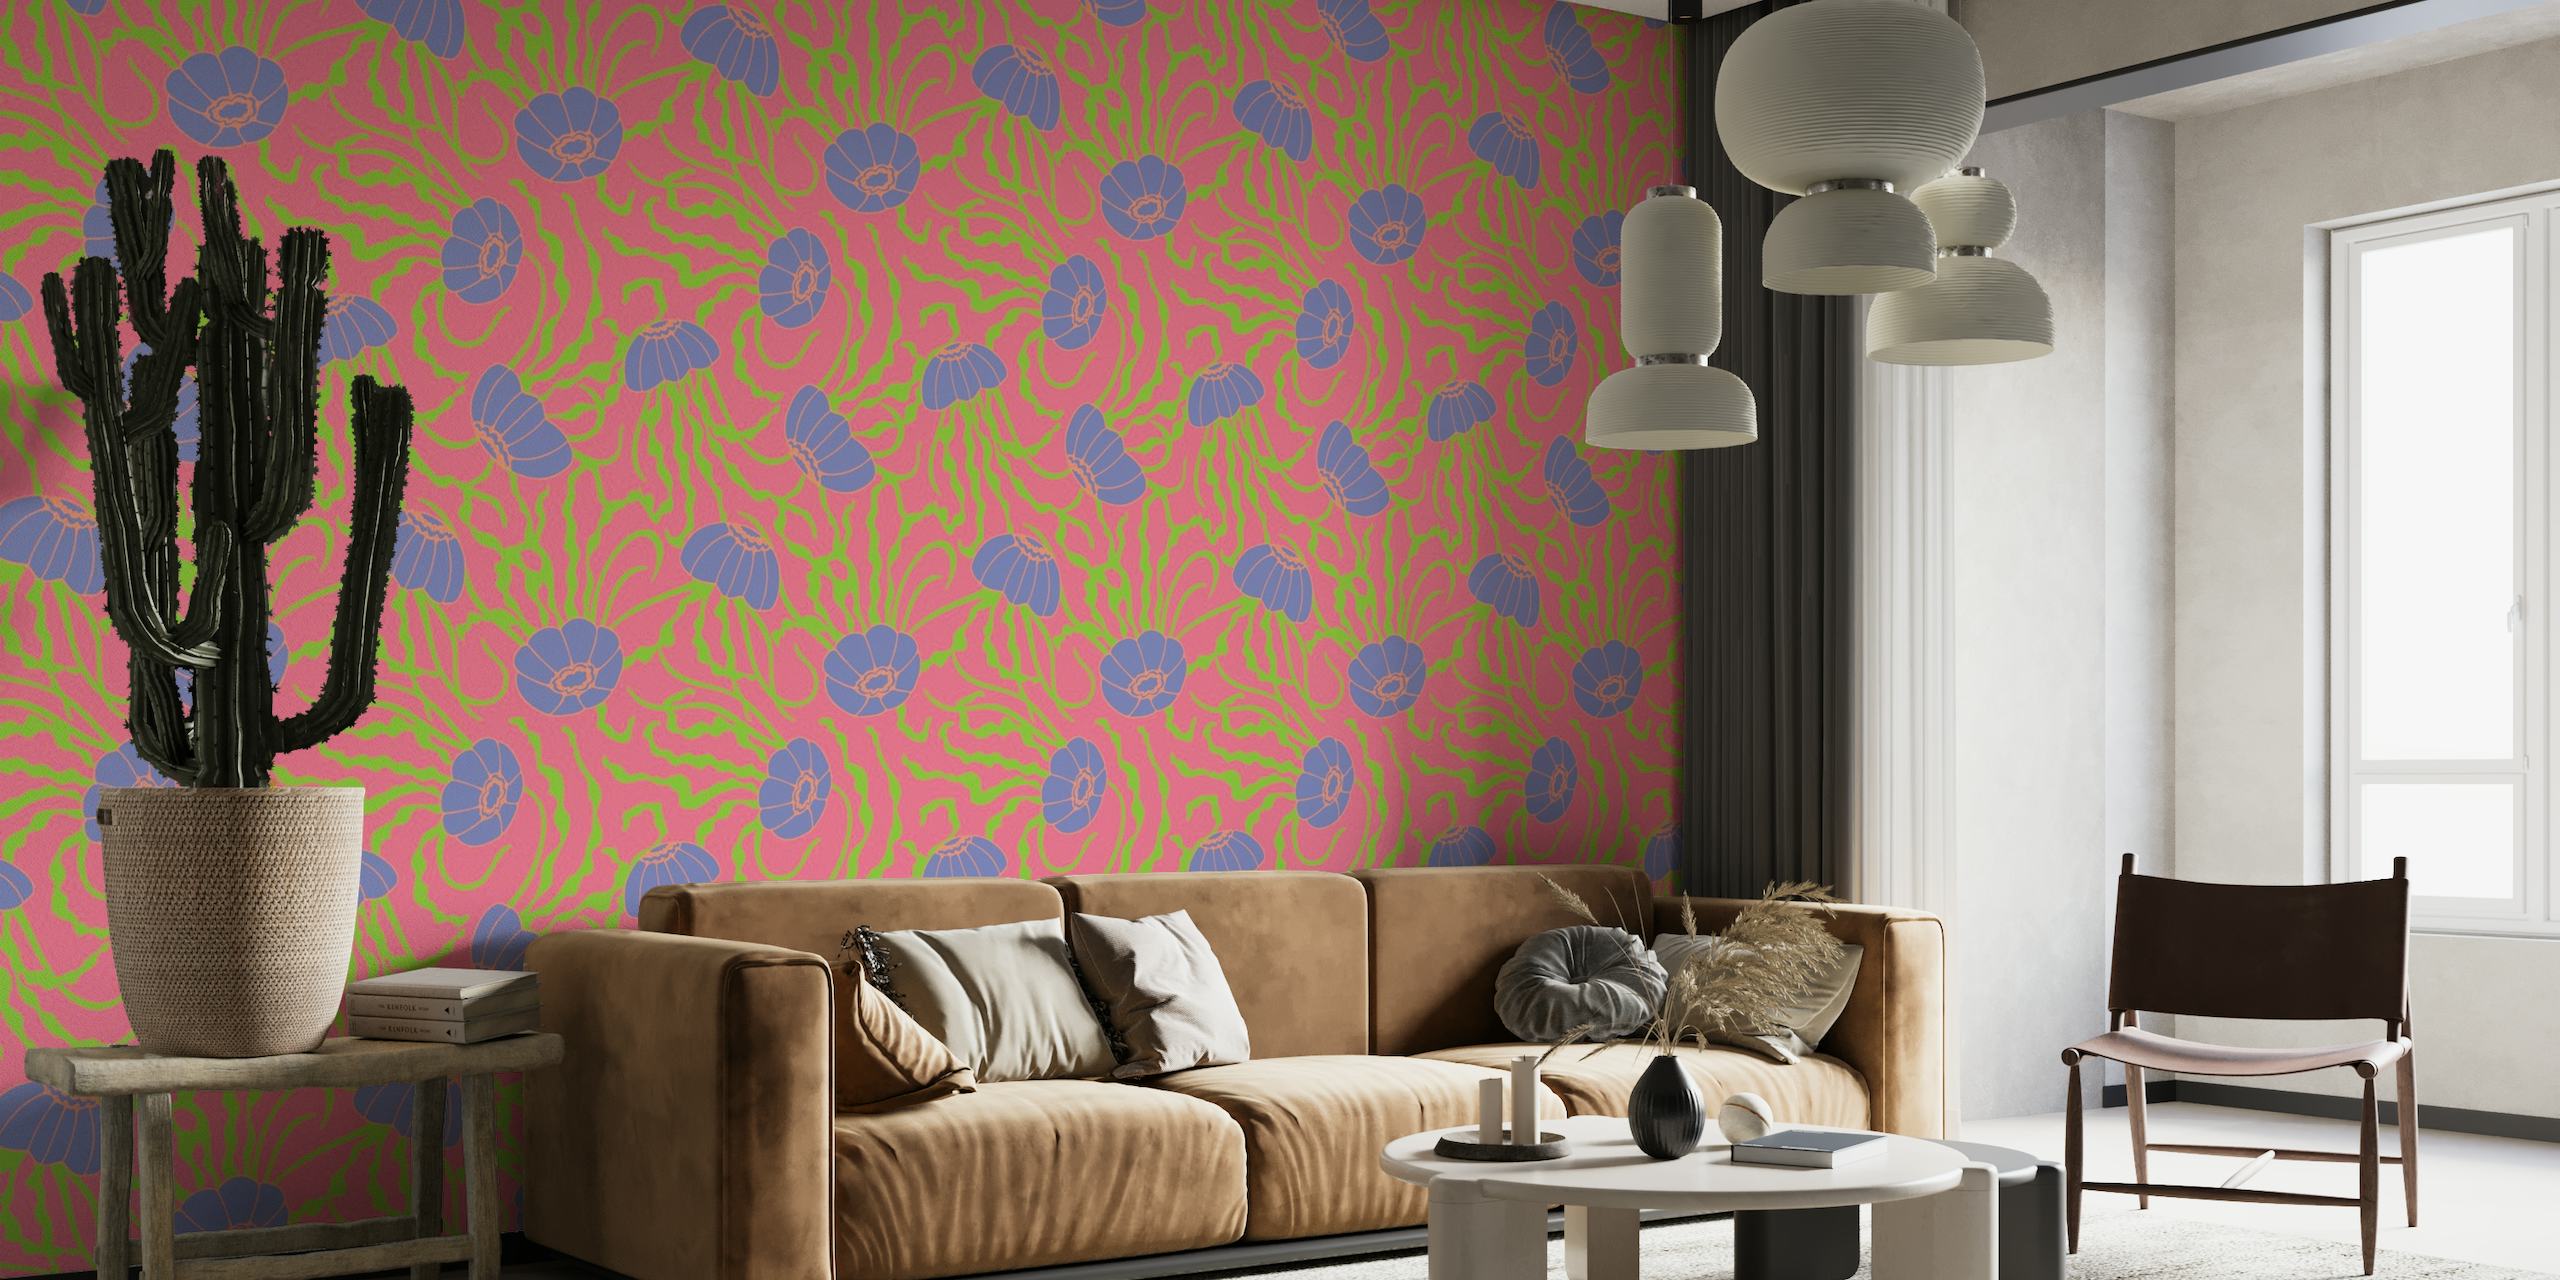 Graceful purple jellyfish pattern on a coral pink background wall mural.